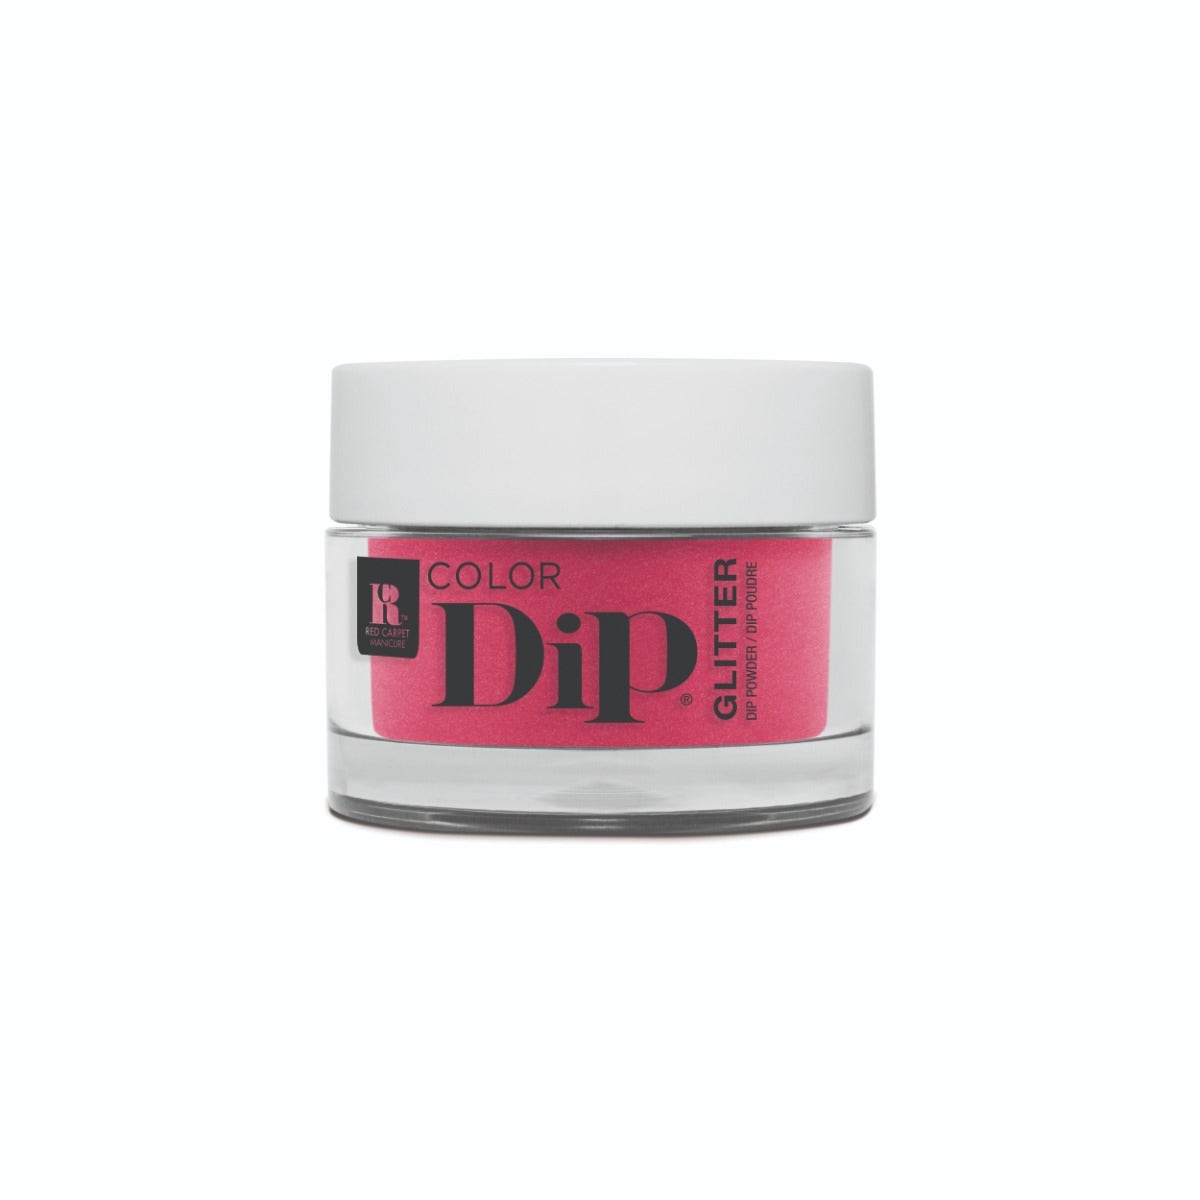 Red Carpet Manicure Color Dip- Sensual Beauty |Nail Dipping Powder| 9 G 20441